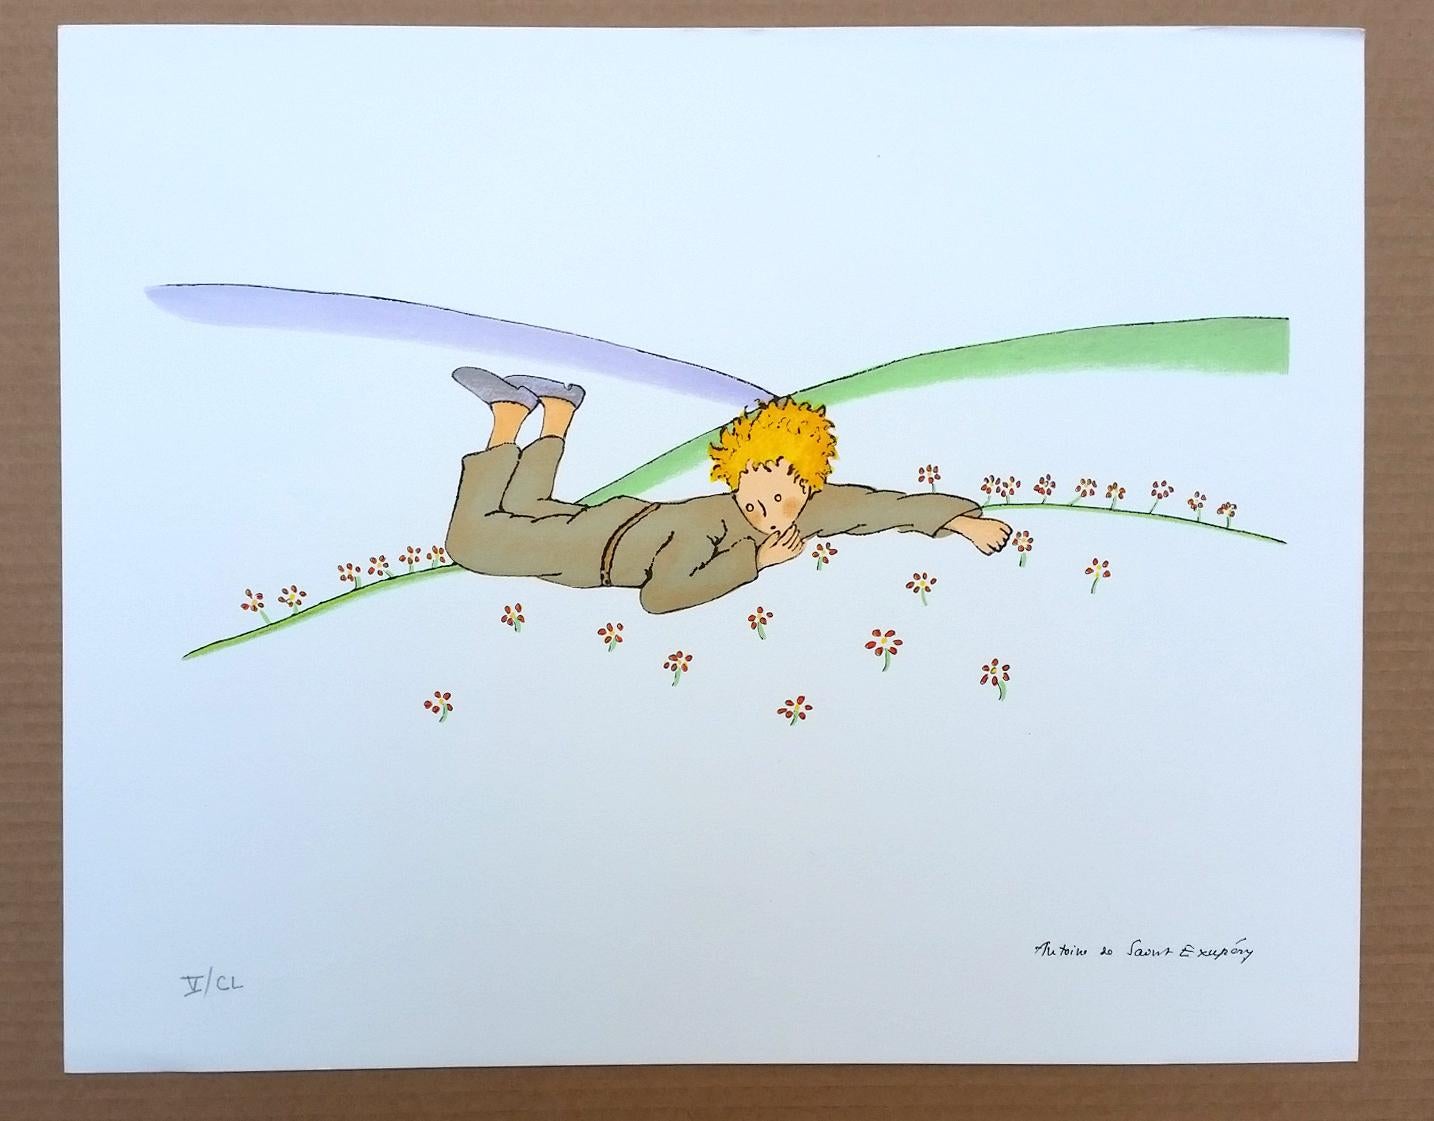 The Little Prince crying in the grass - Print by Antoine de saint Exupery